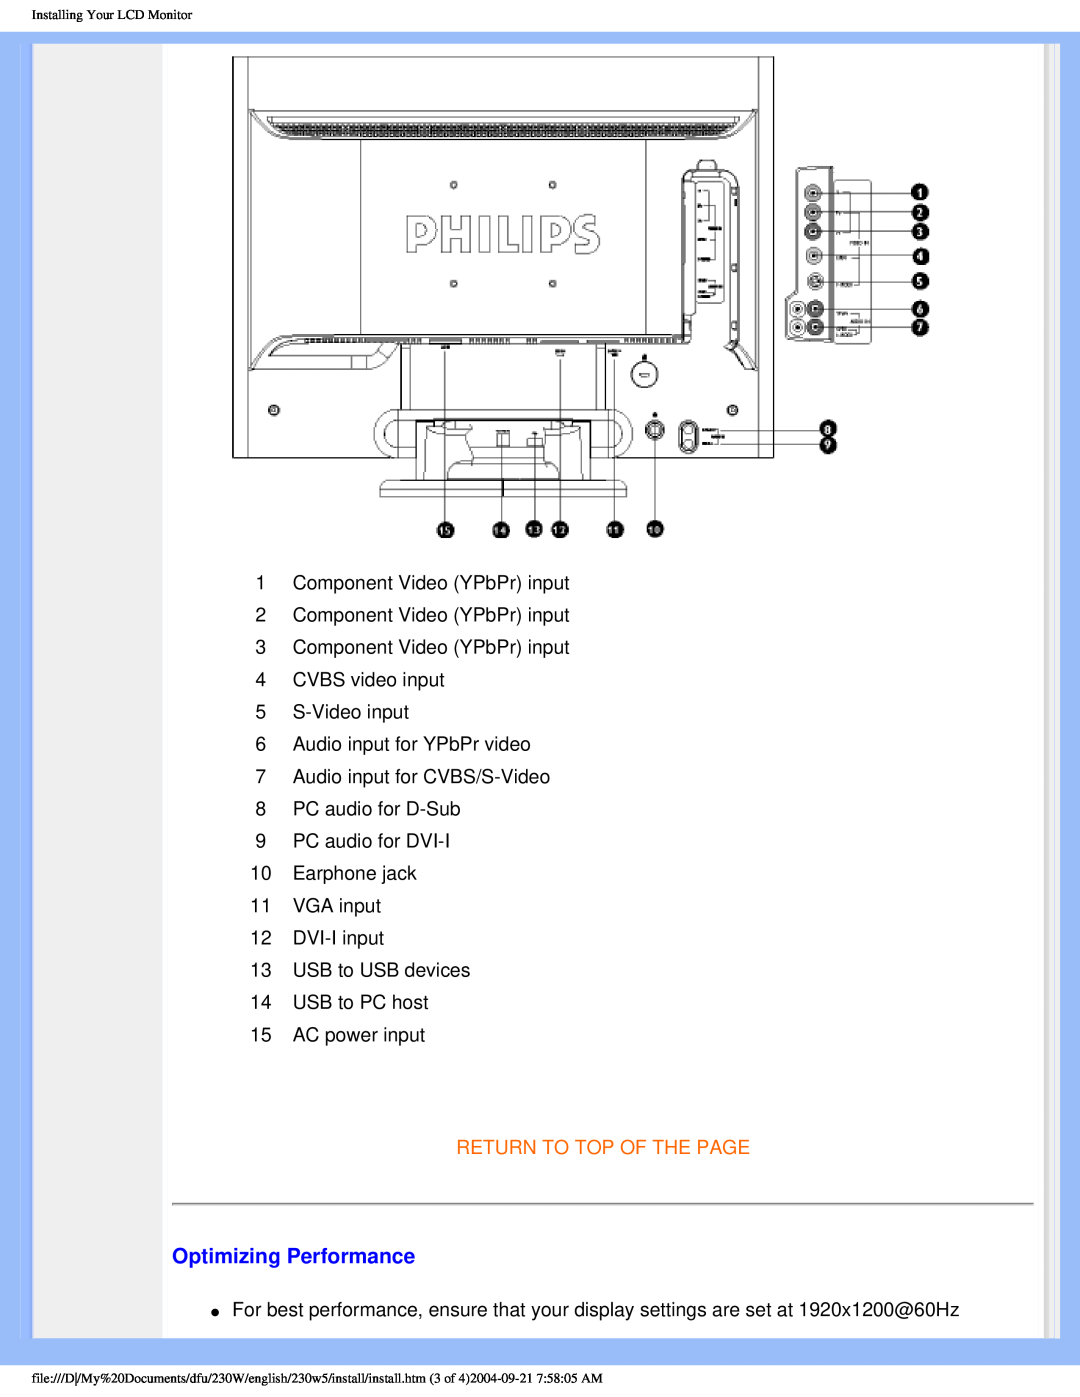 Philips 230w5 user manual Optimizing Performance, Return To Top Of The Page 